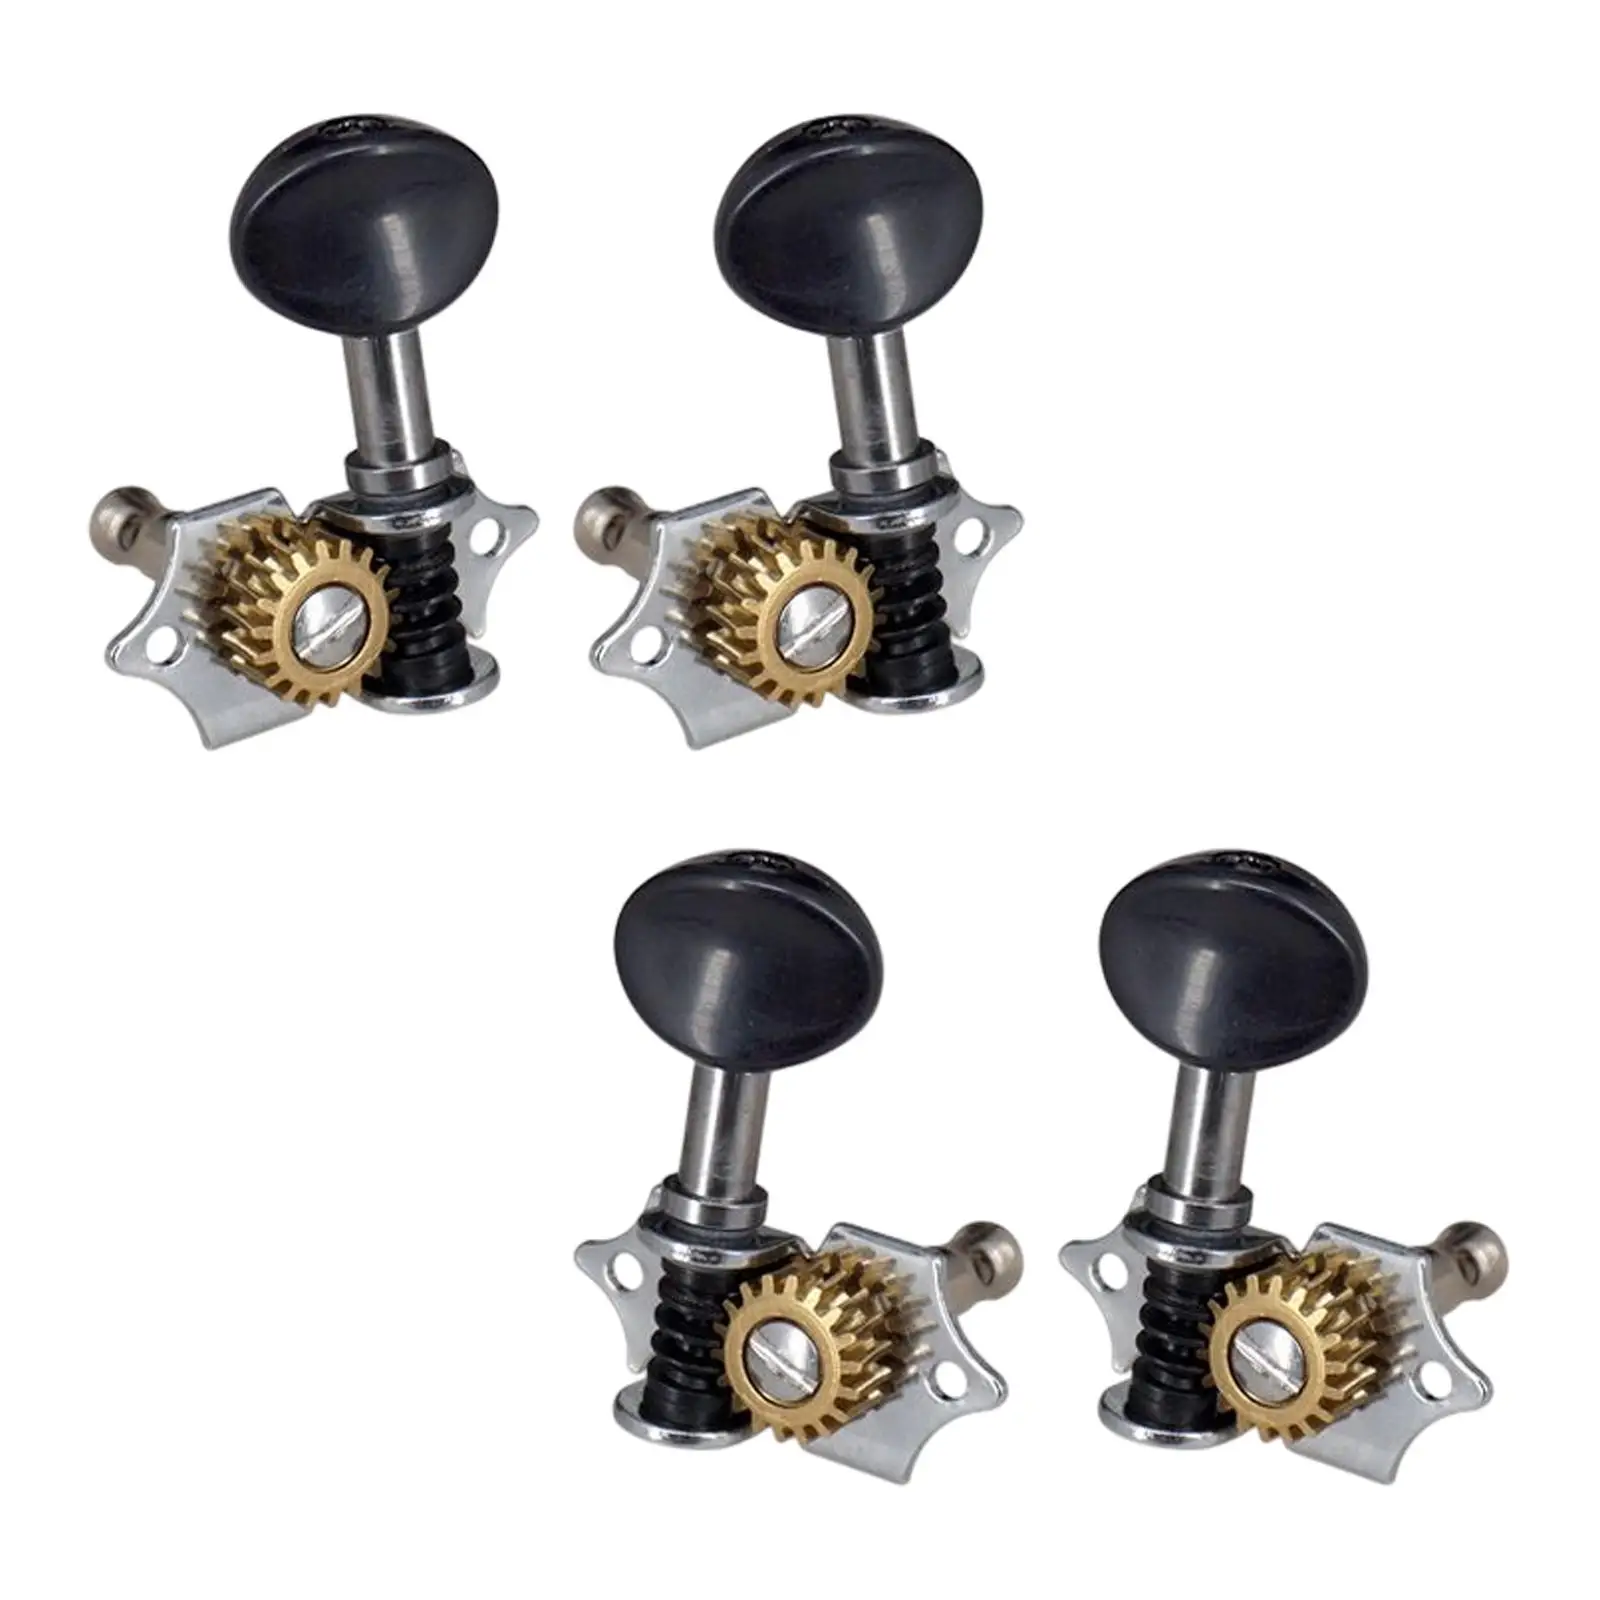 4Pcs 1:18 Ukulele Tuning Pegs Guitar Accessories Replaces Ukulele DIY Parts machine Heads Small Concave Button Ukelele String